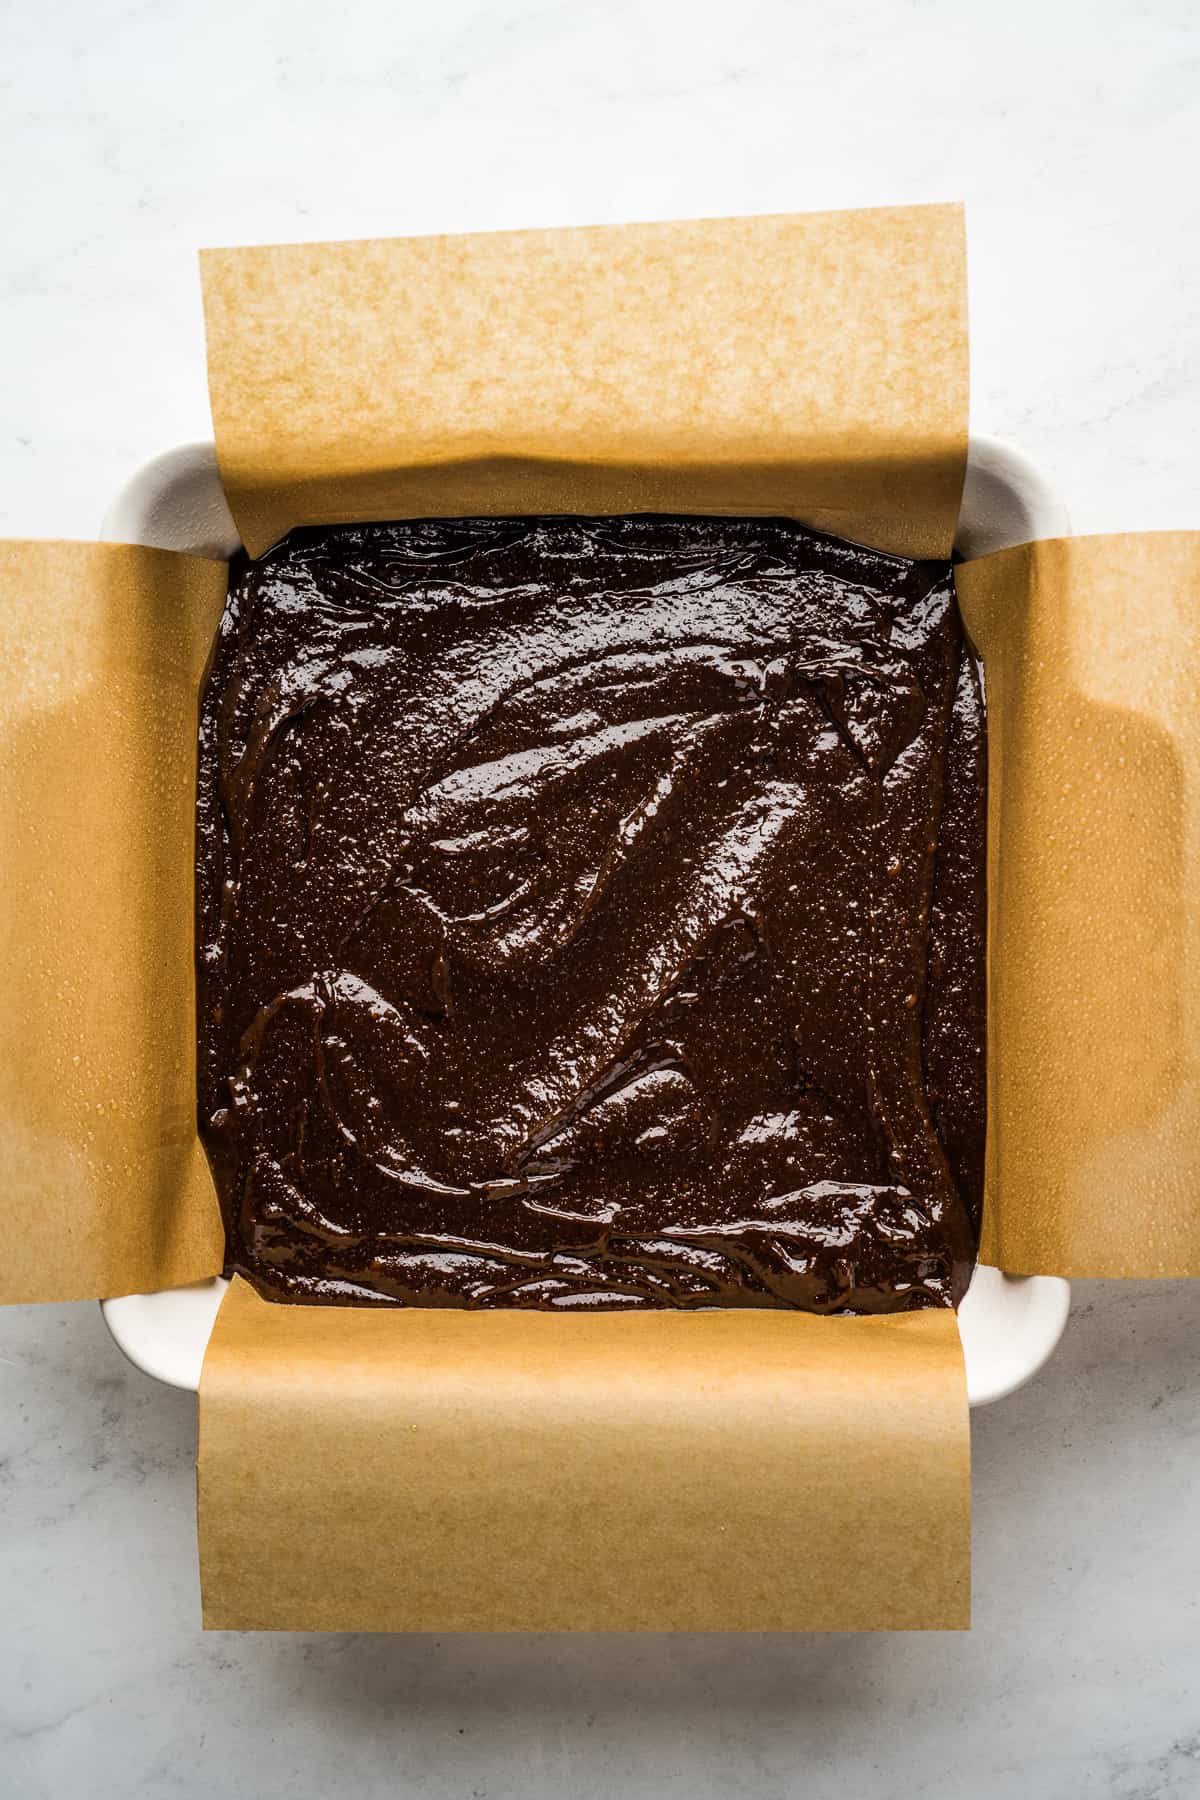 Brownie batter in a square baking pan lined with parchment paper